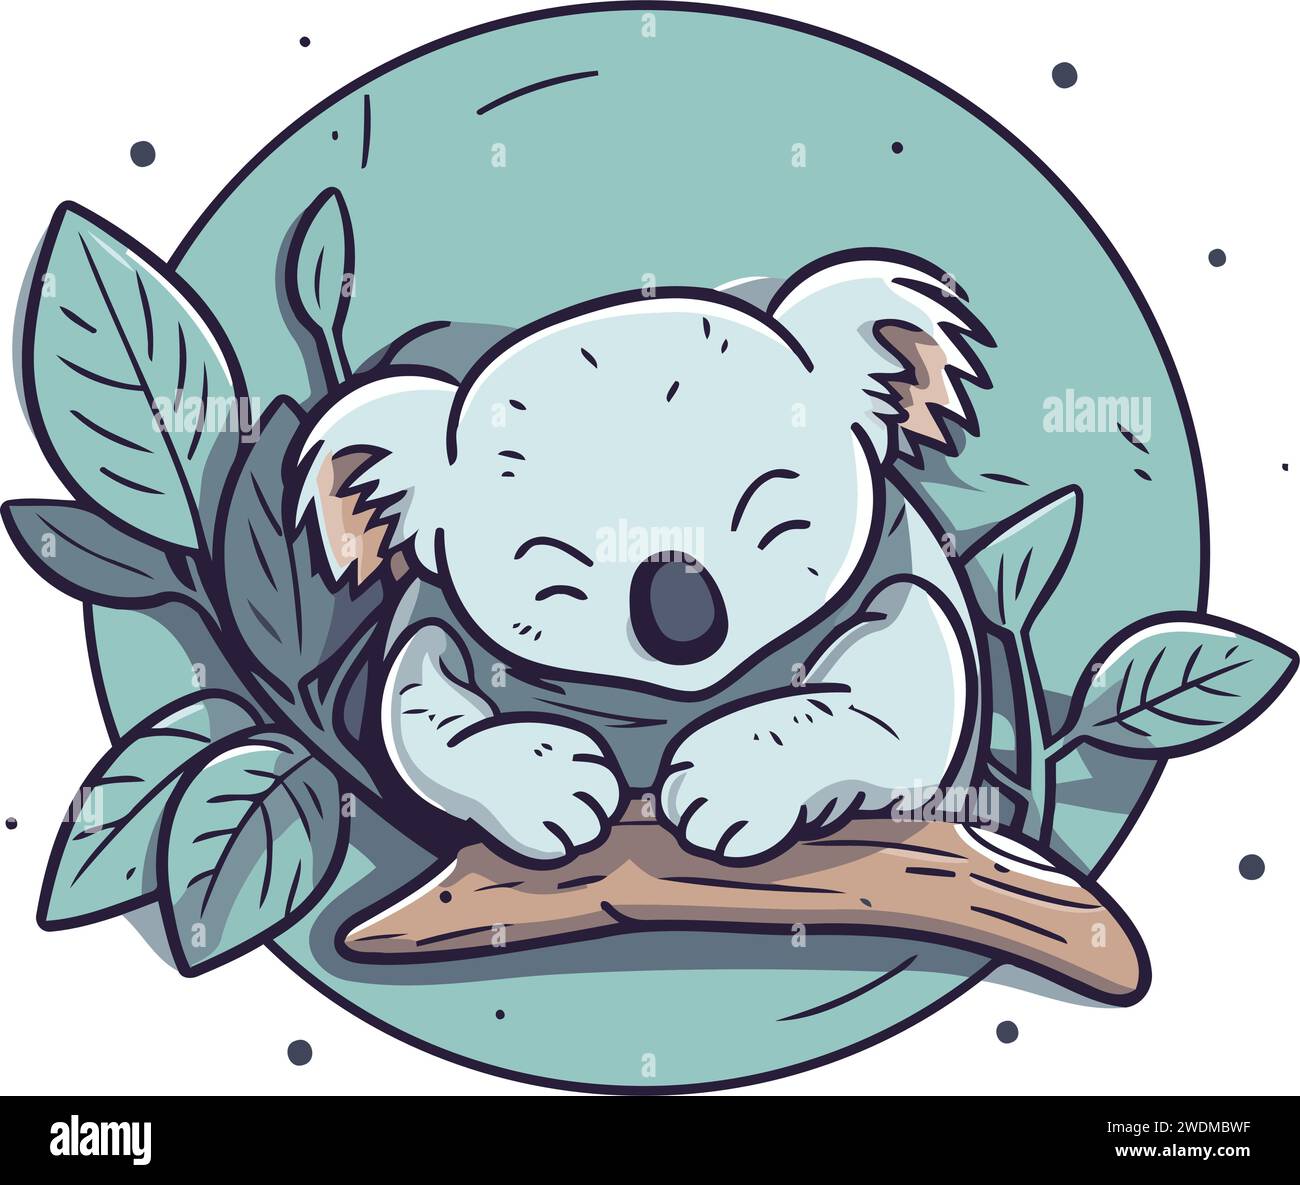 Cute koala sitting on a branch with leaves. Vector illustration. Stock Vector